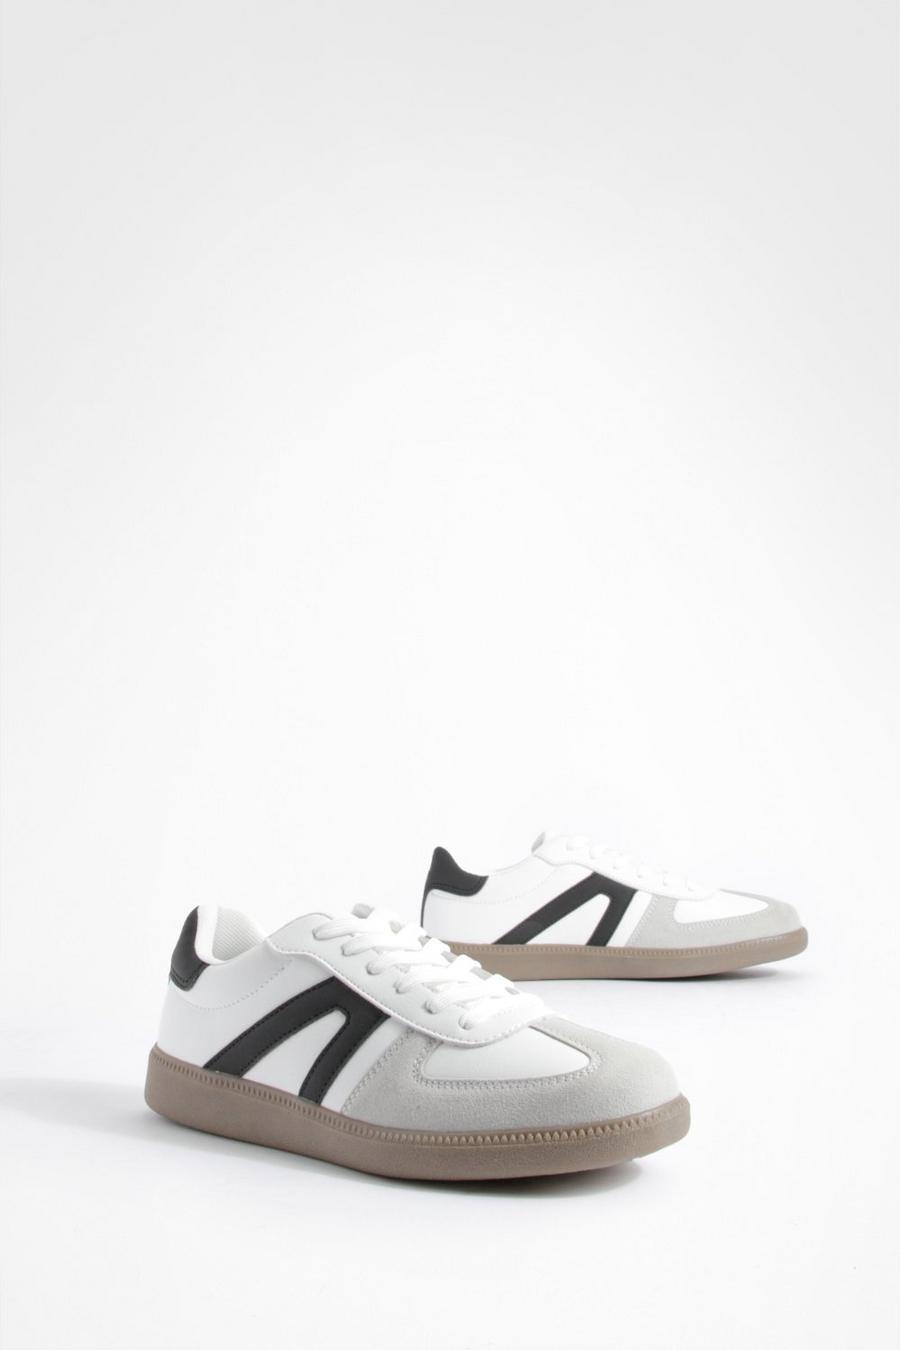 White Contrast Panel Gum Sole Sneakers image number 1